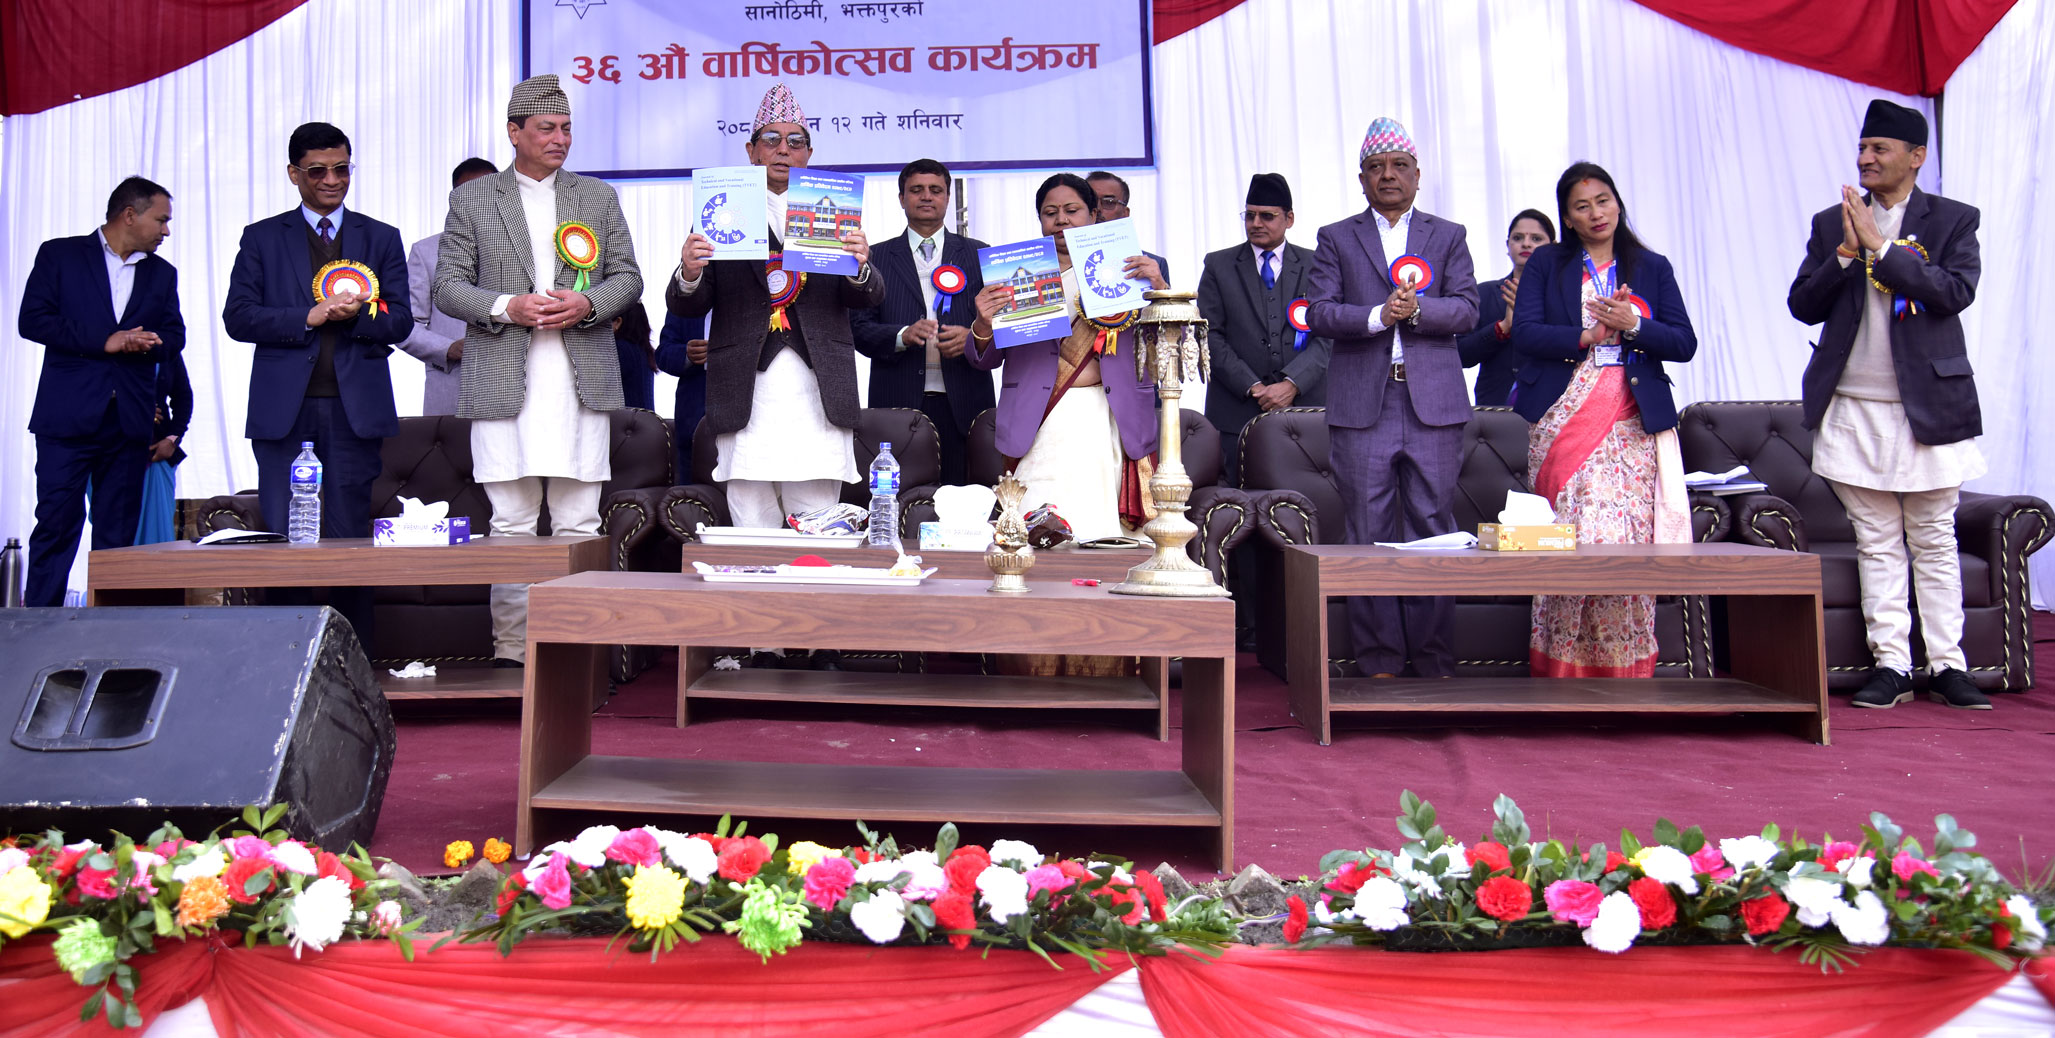 Release of Annual Report 2079-80 and TVET Journal at 36th Annual Day